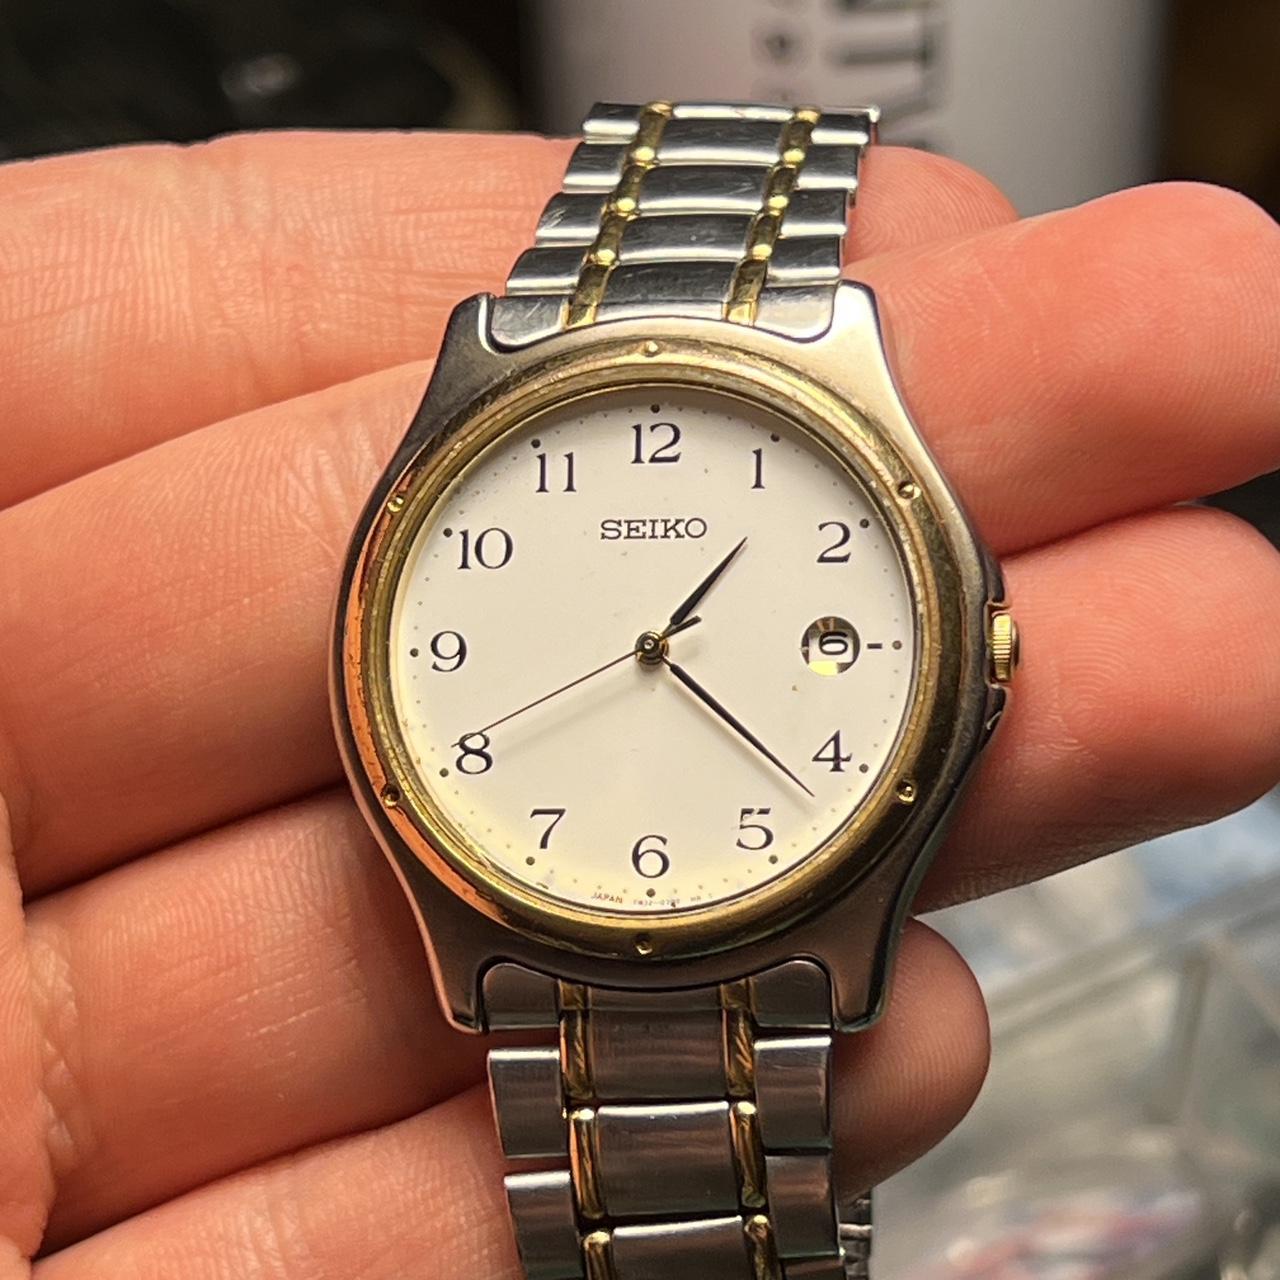 Seiko Men's Gold and Silver Watch